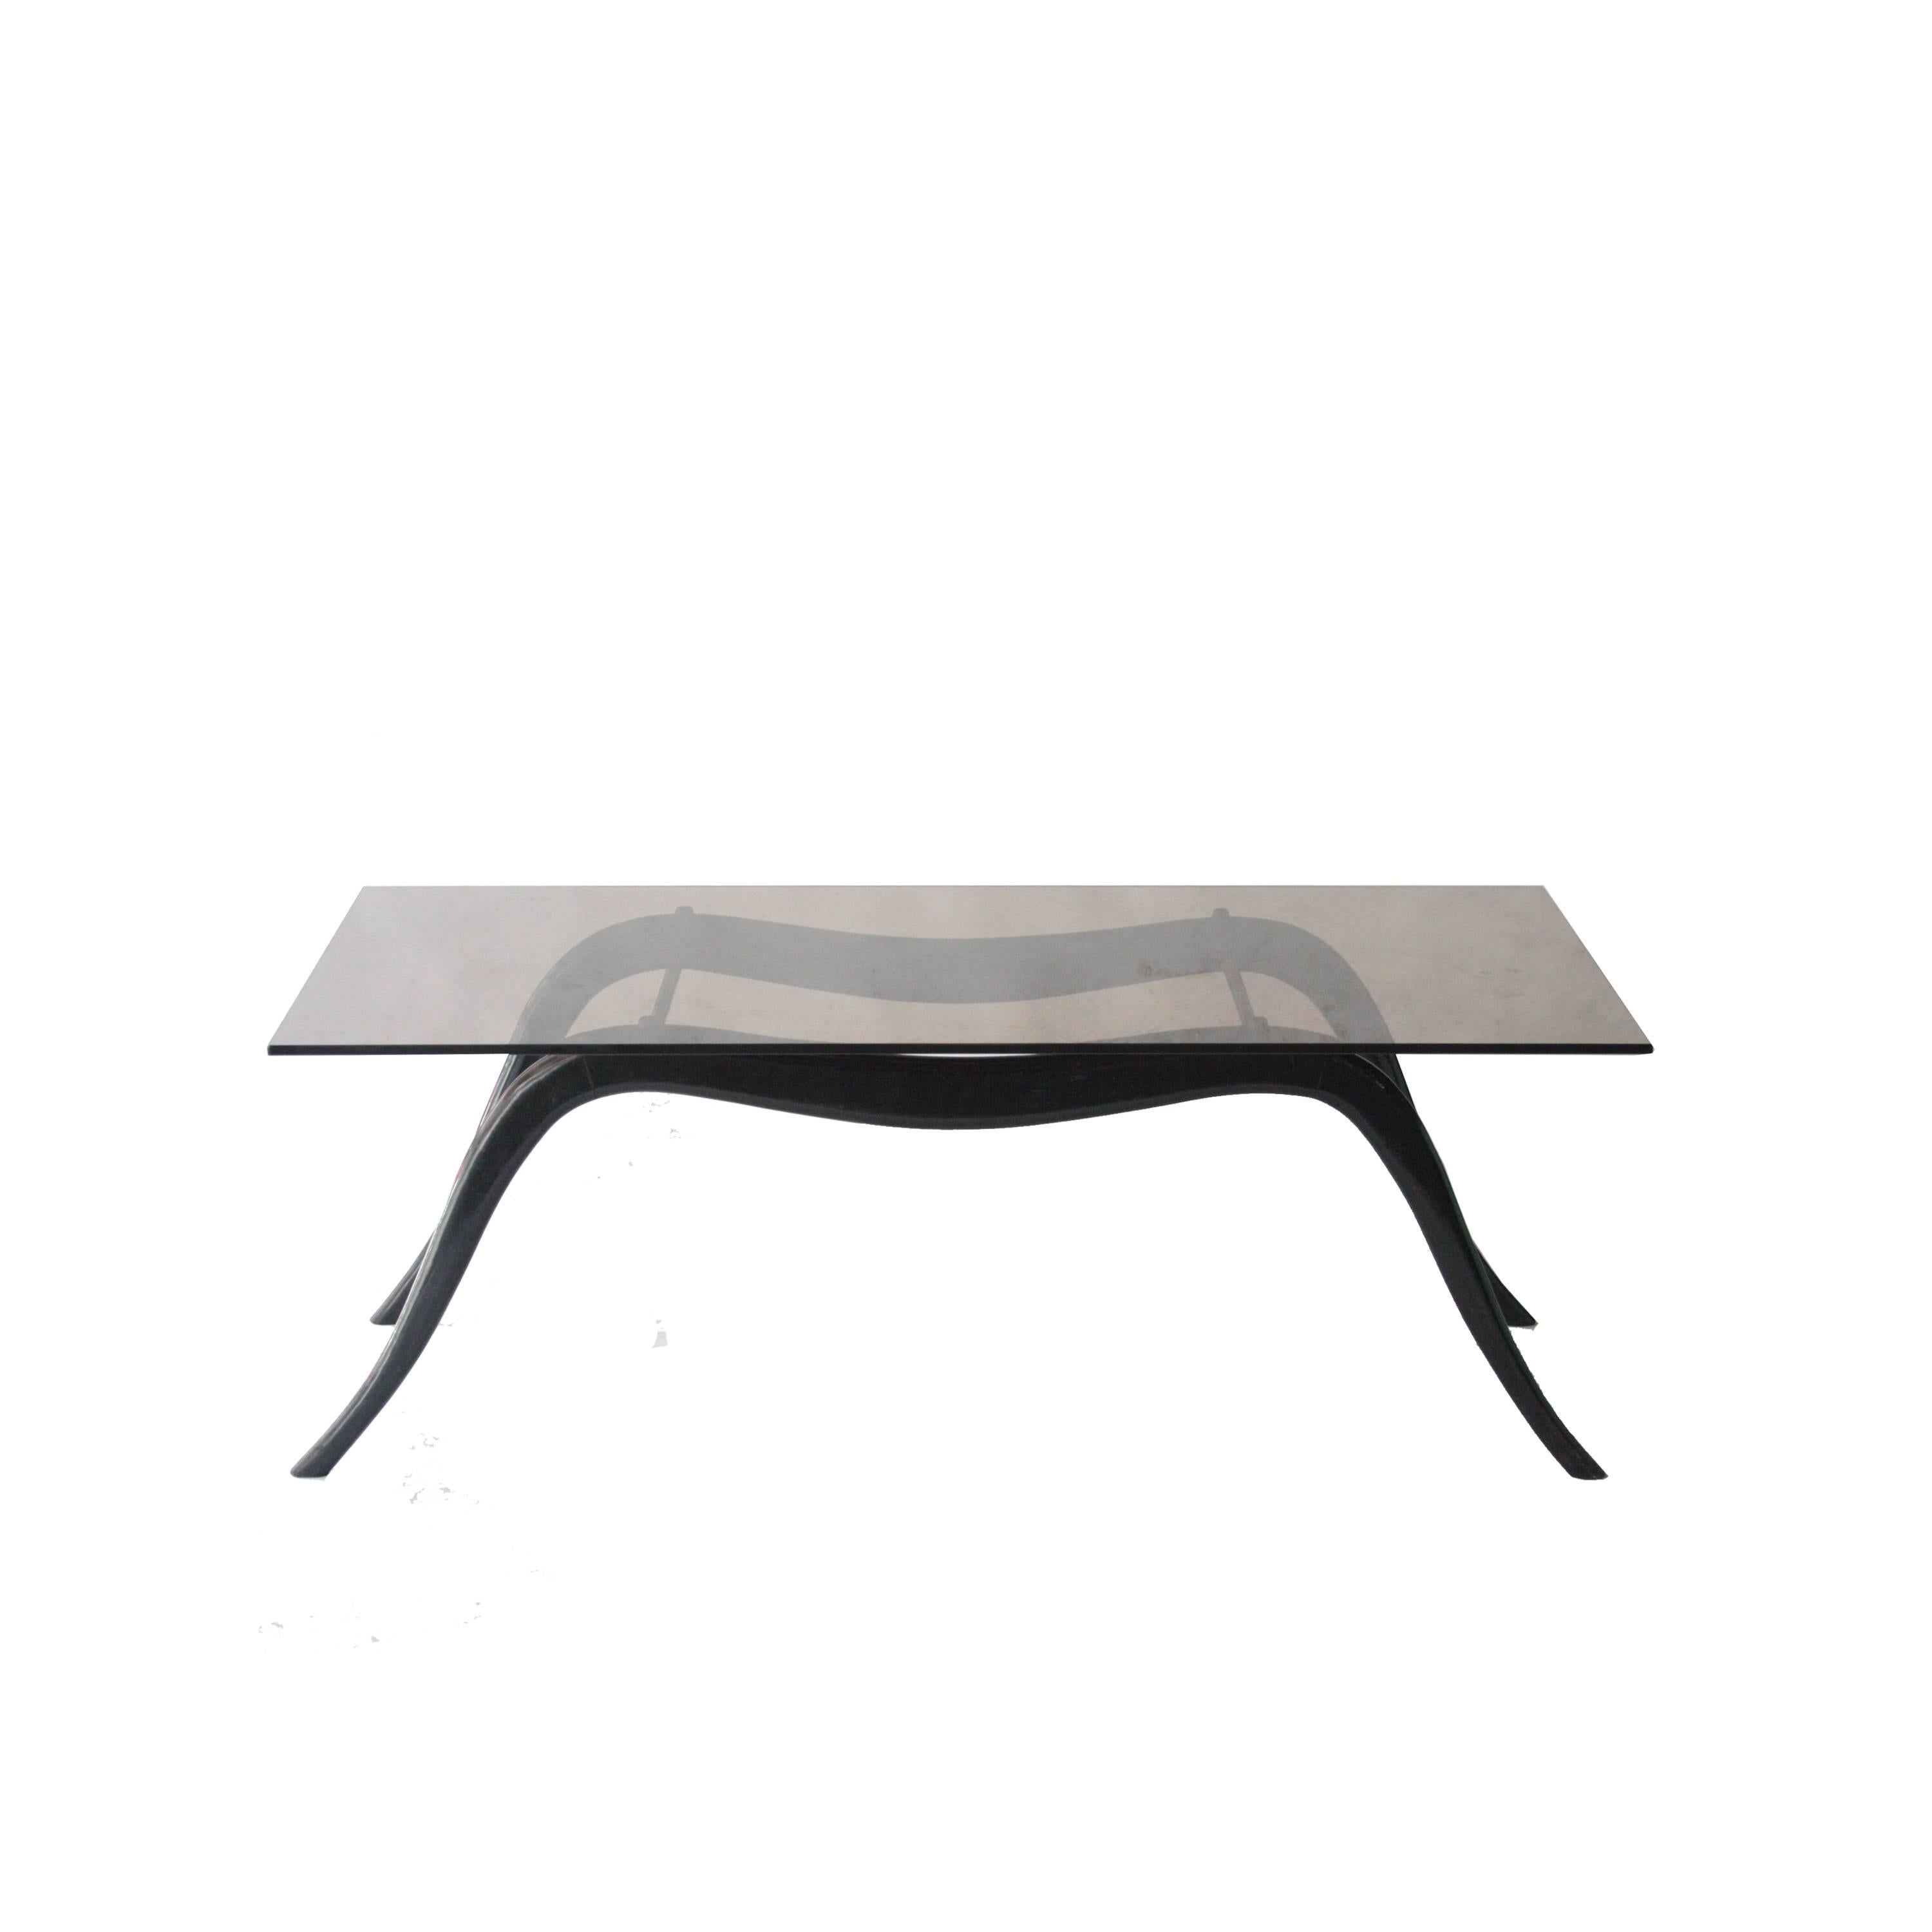 Centre table attributed to Ico Parisi with structure made of solid black lacquered wood, brass and black smoked glass top.